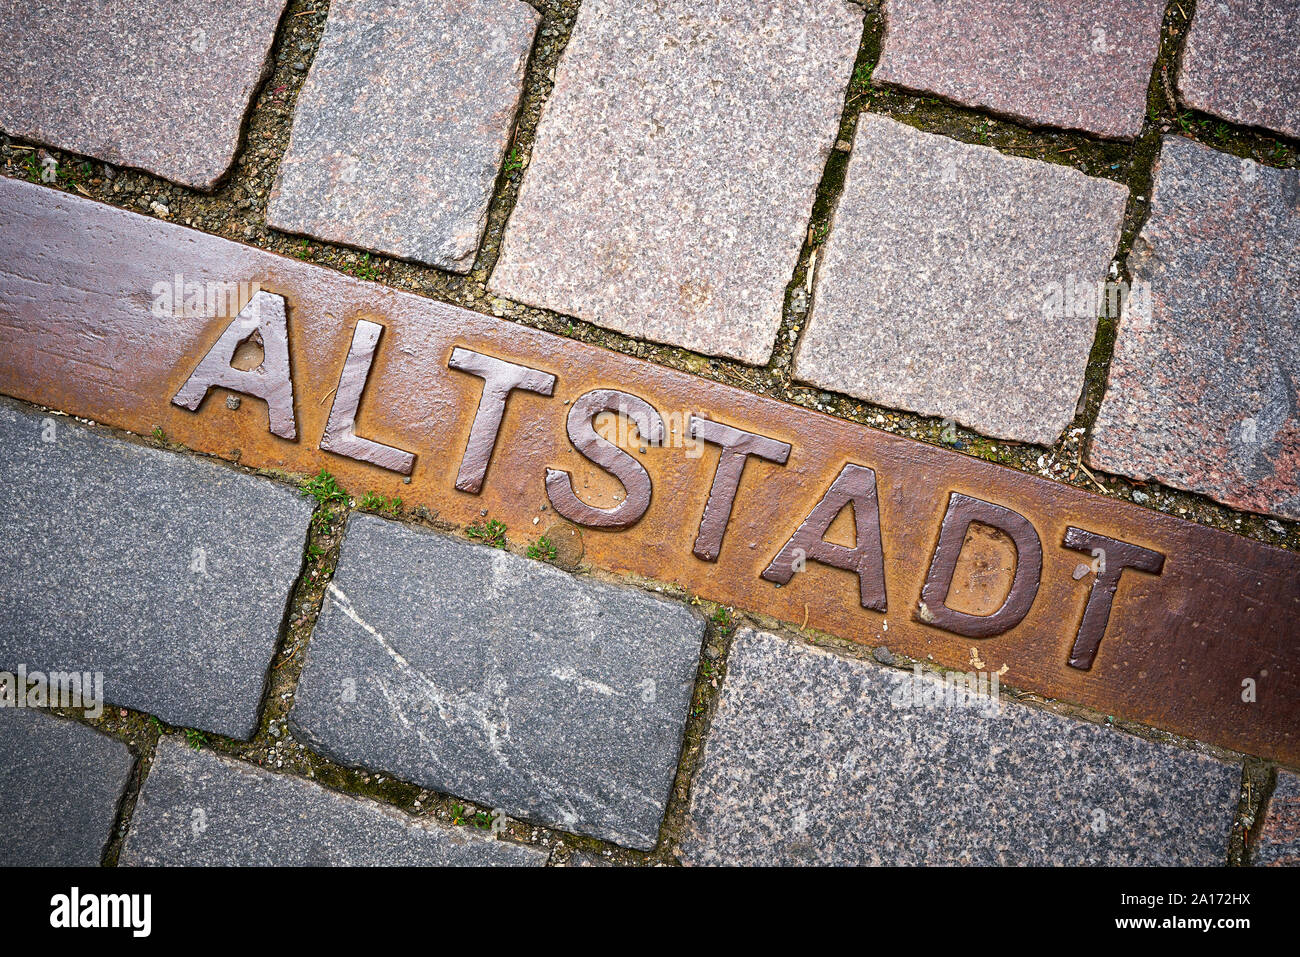 Marking the historic old town on the cobblestones of the town Schmalkalden in Thuringia with the words 'Altstadt' Stock Photo